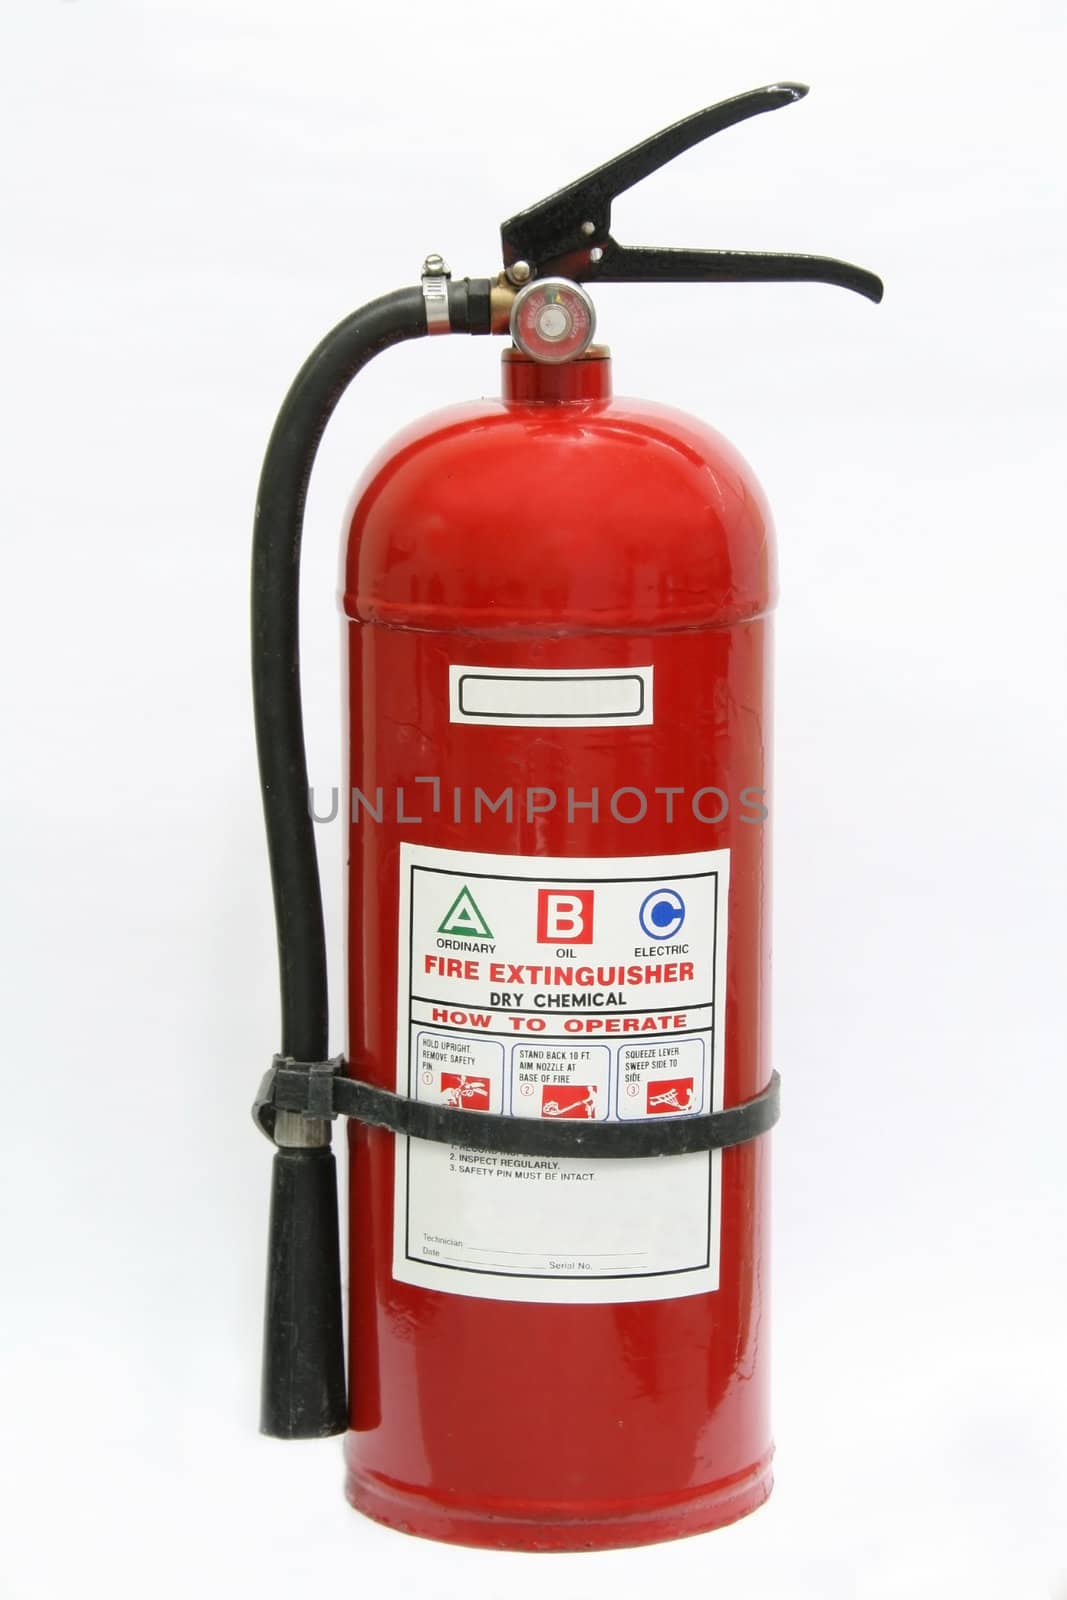 dry chemical fire extinguisher isolated on white background
